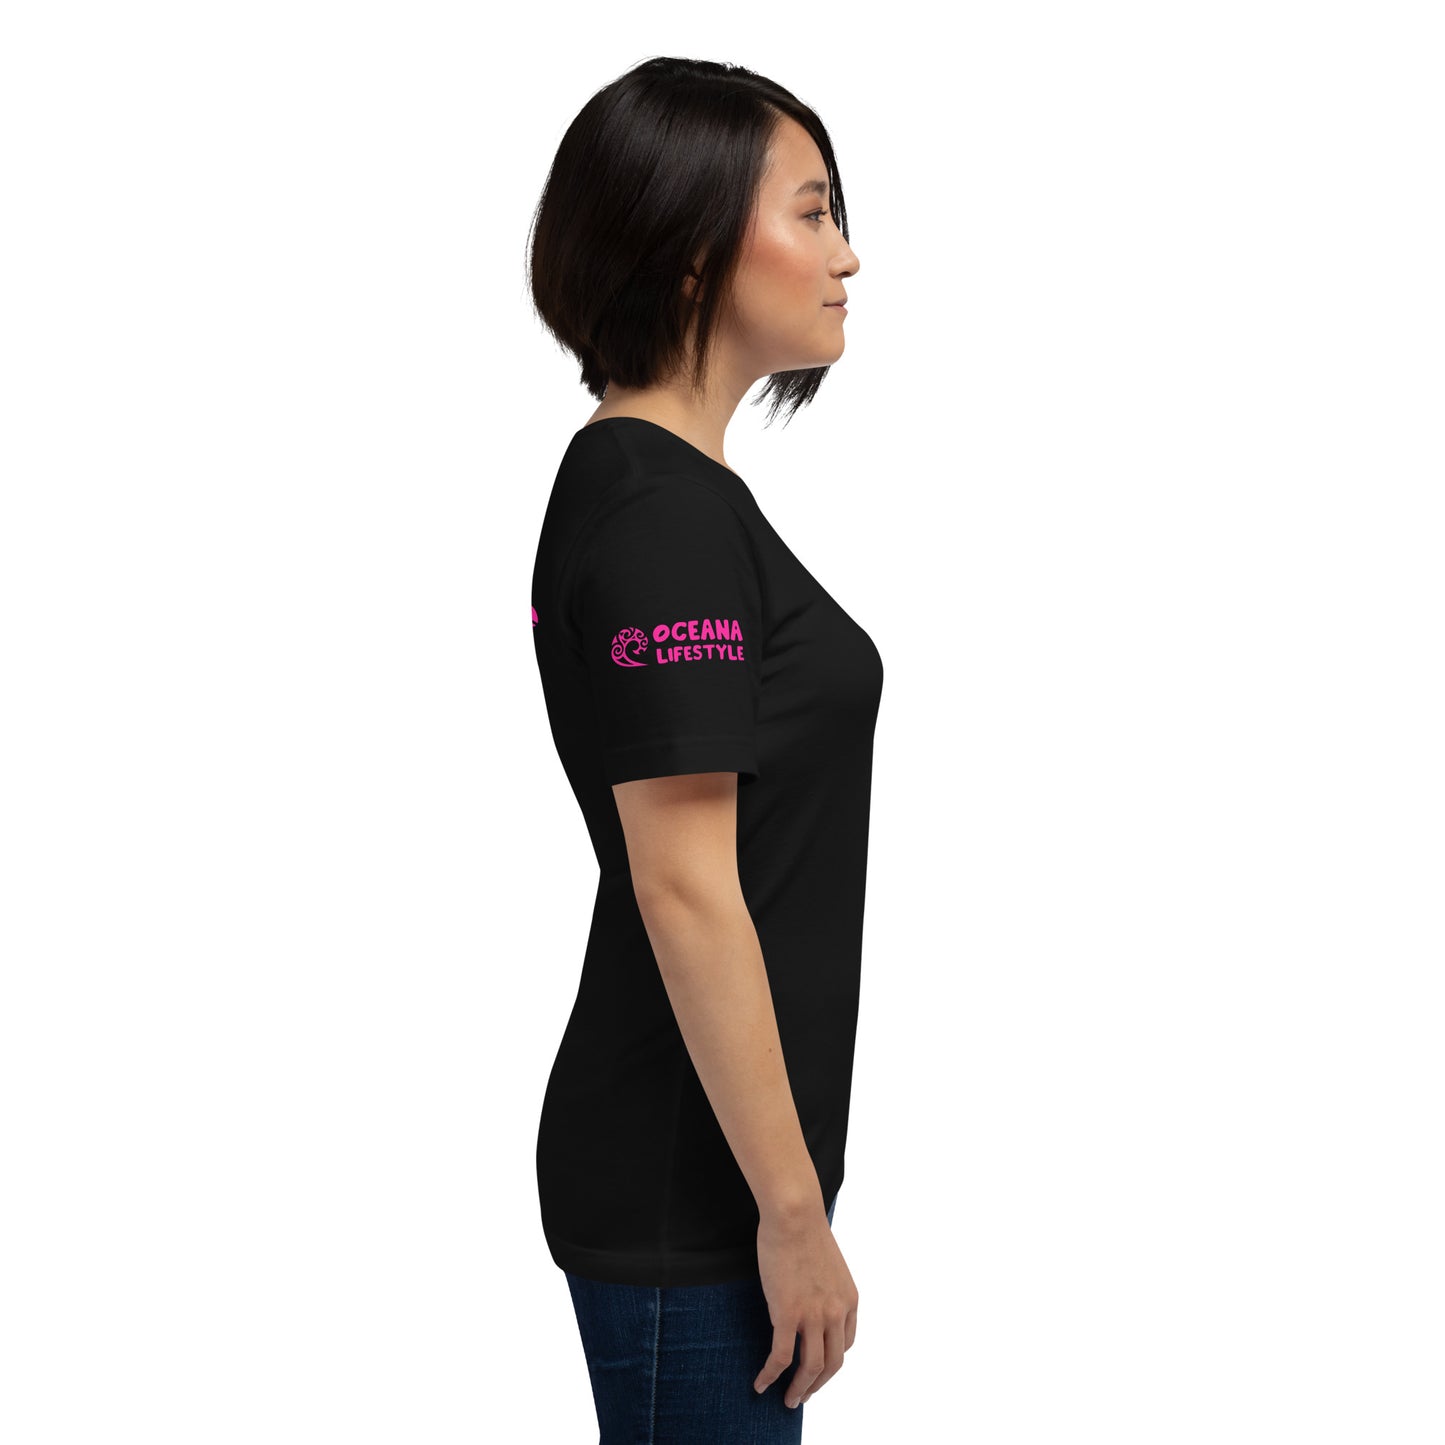 Polynesian Dolphin T-shirt For Men and Women Right Pink on Black